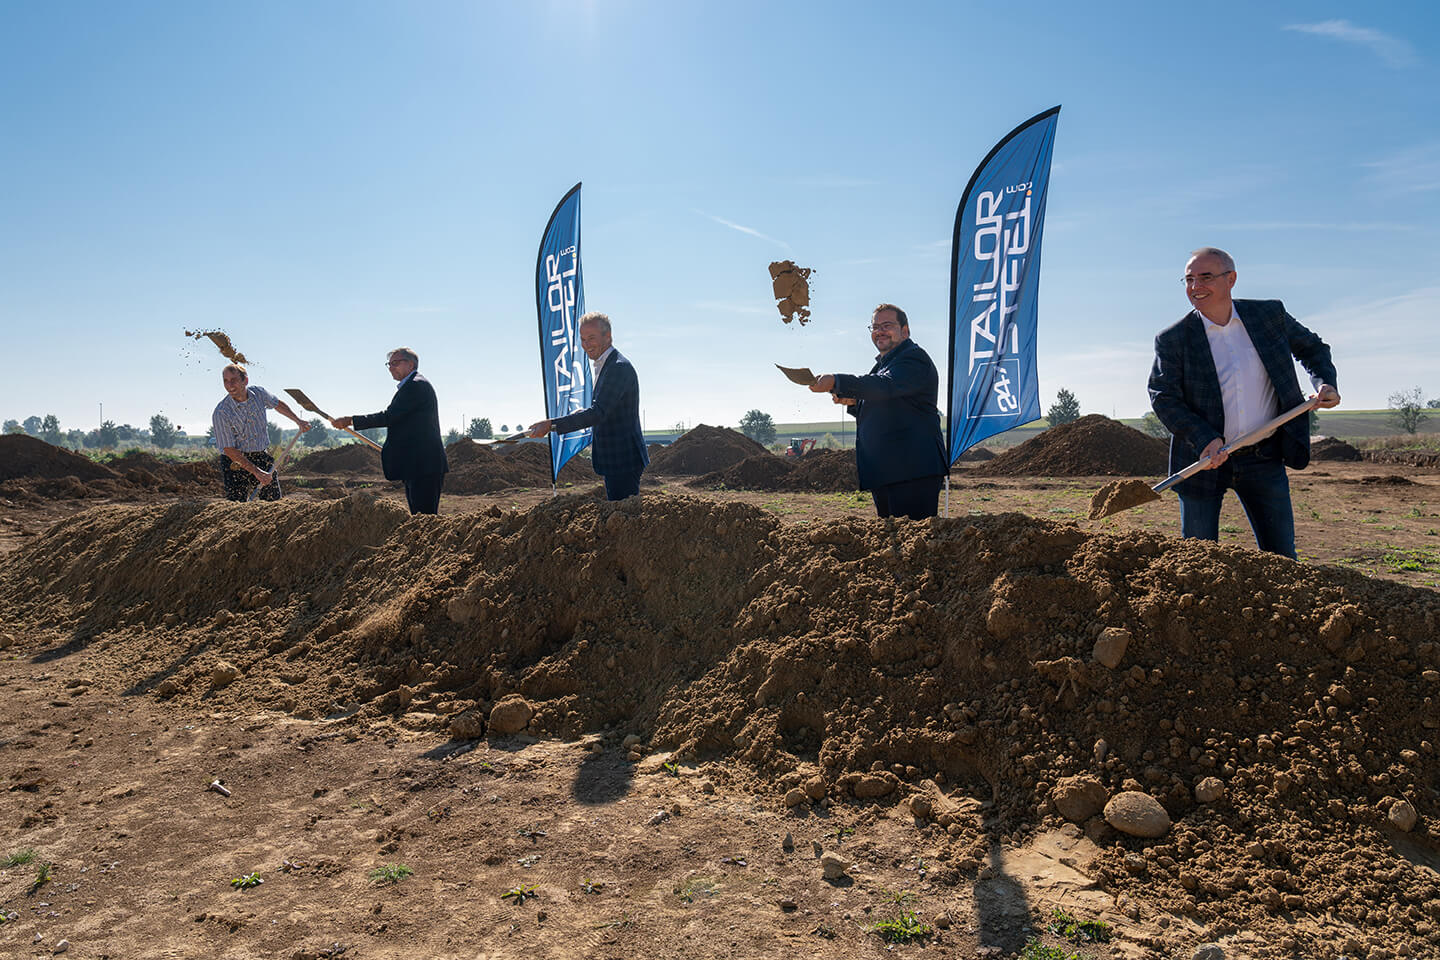 Construction of new 247TailorSteel production facility in Germany has started